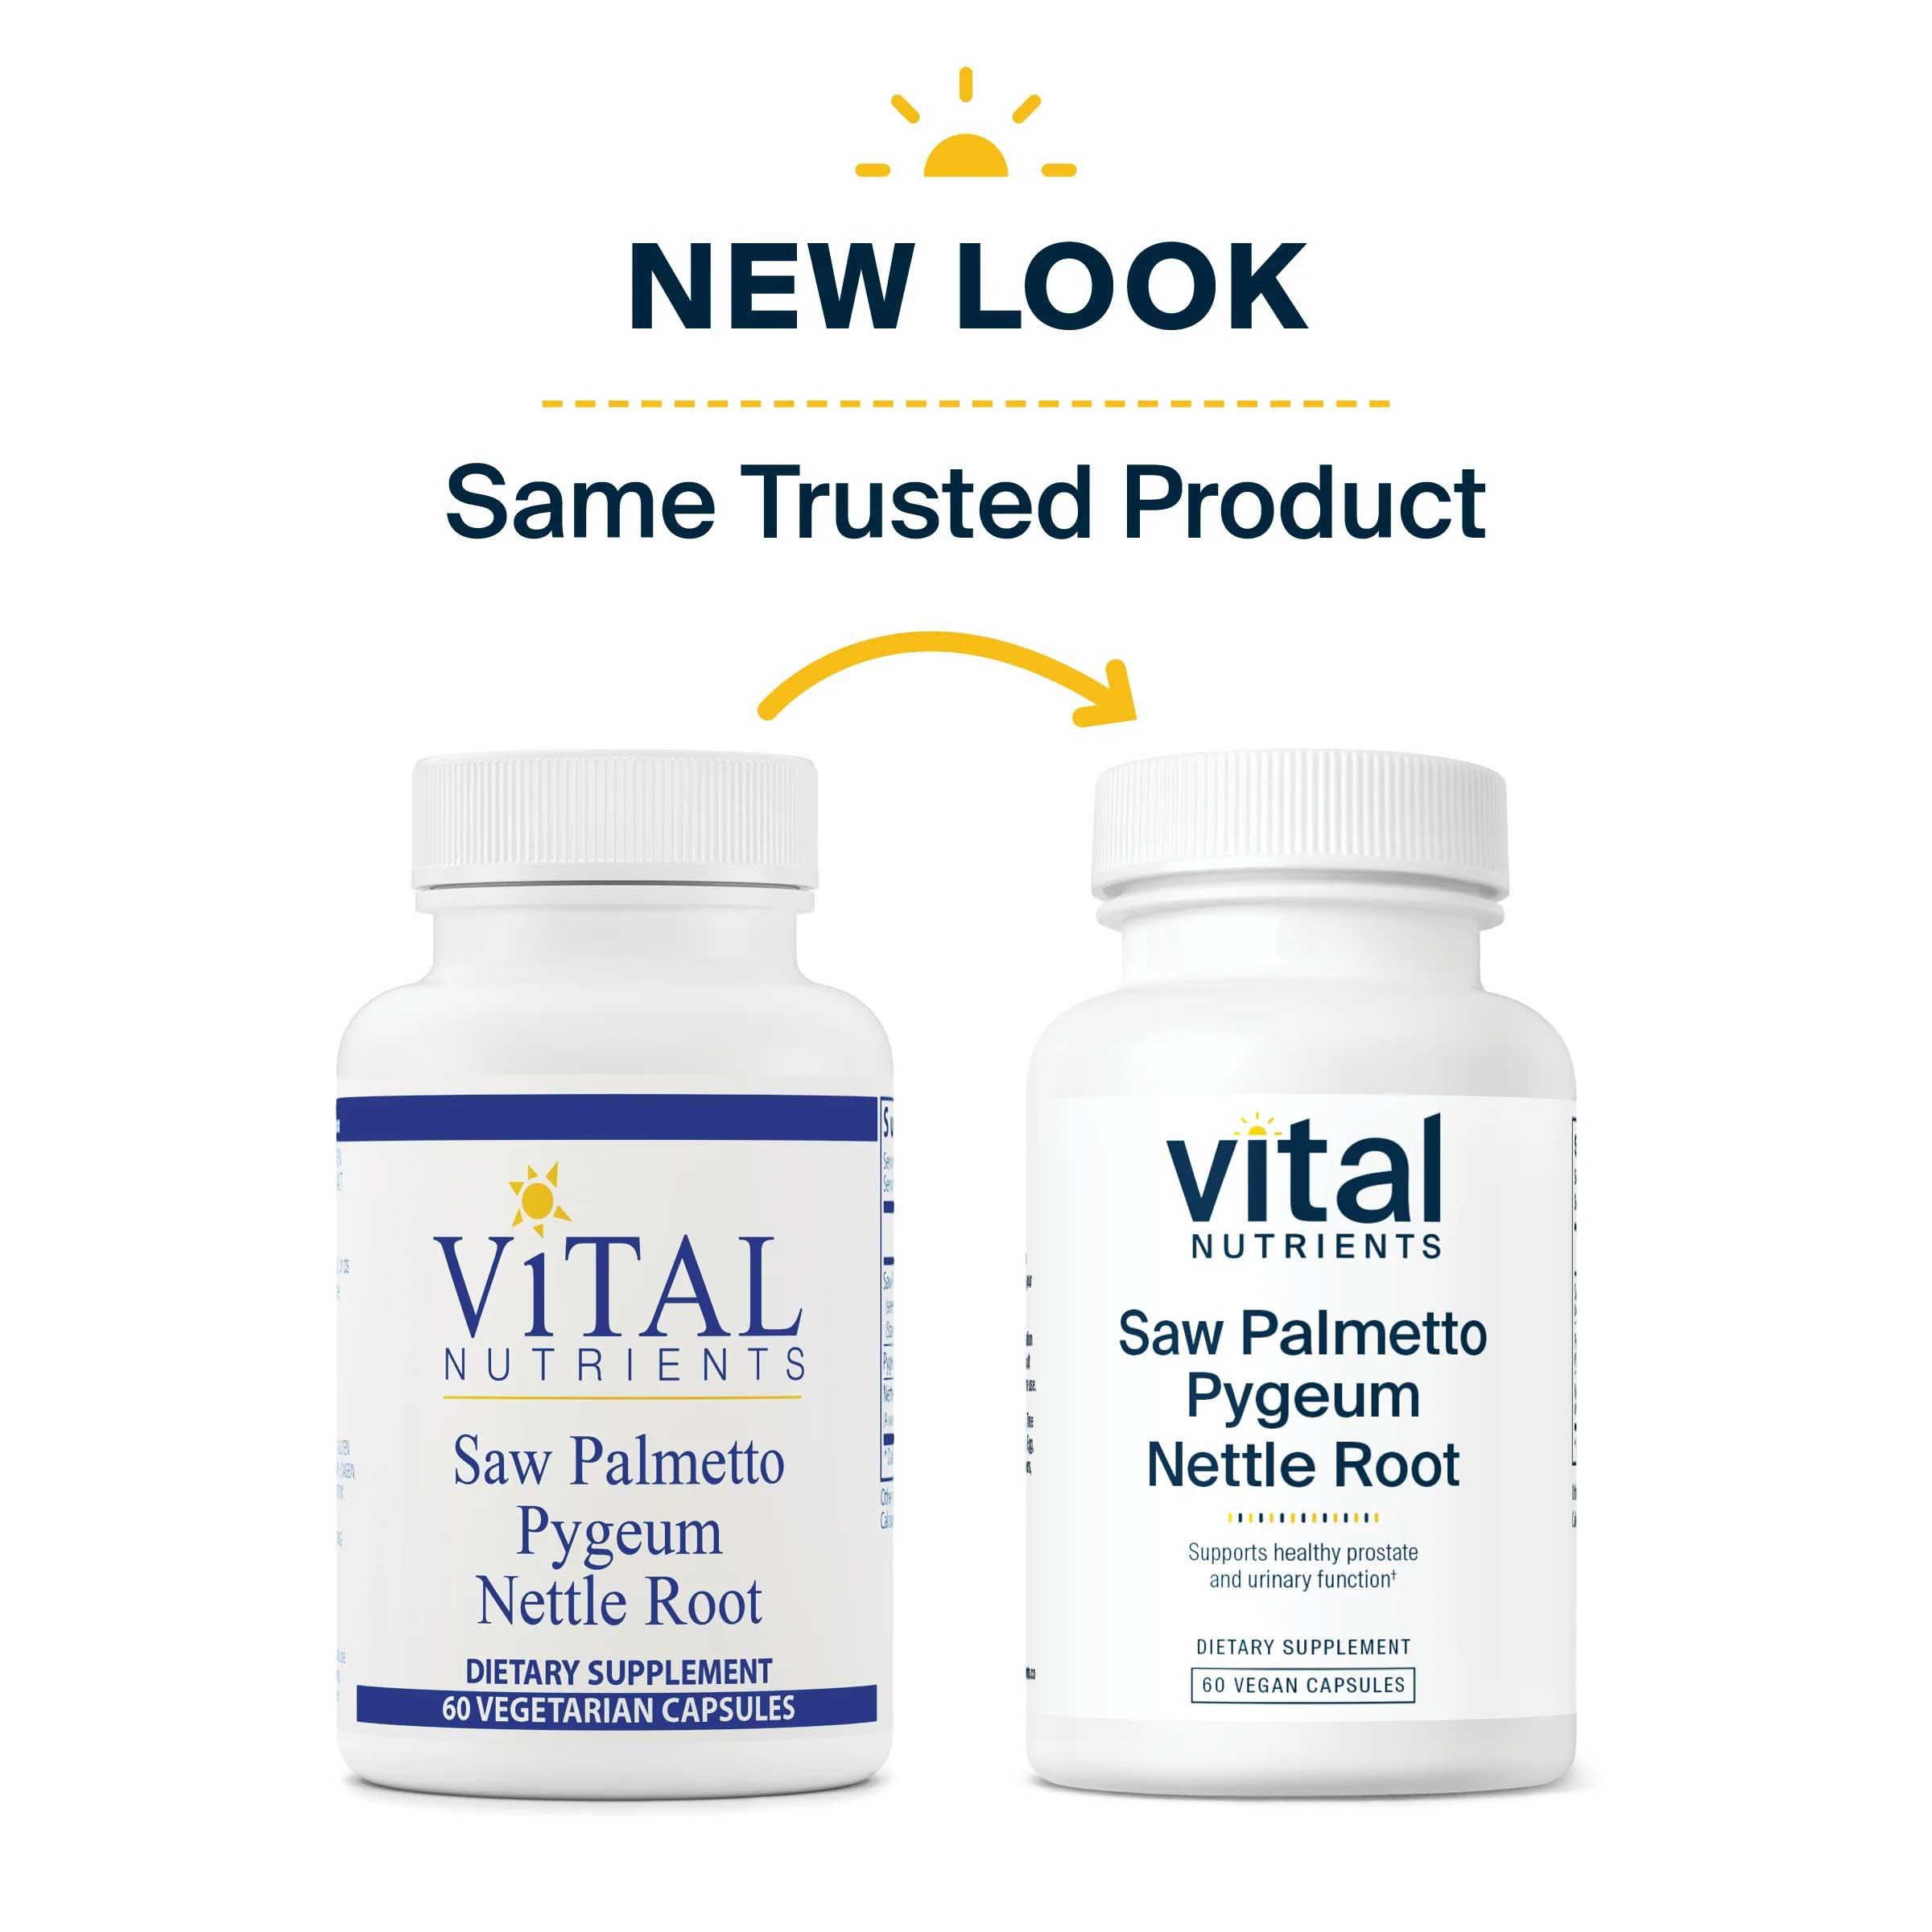 Vital Nutrients Saw Palmetto Pygeum Nettle Root New Look